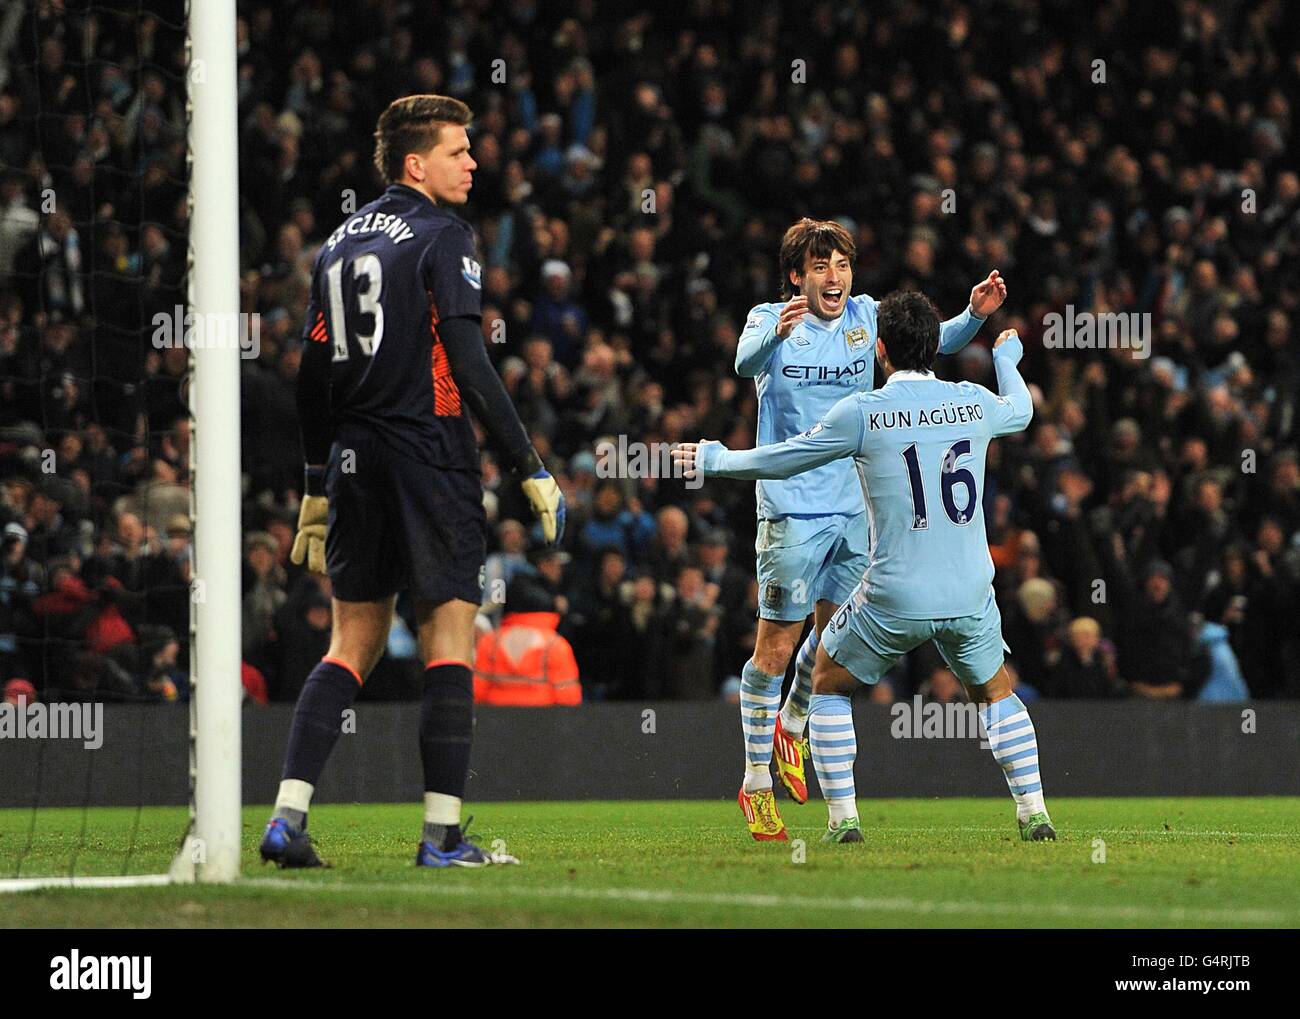 Manchester City's David Silva (centre) celebrates after scoring the first goal with team mate Sergio Aguero (right) as Arsenal goalkeeper Wojciech Szczesny (left) stands dejected Stock Photo